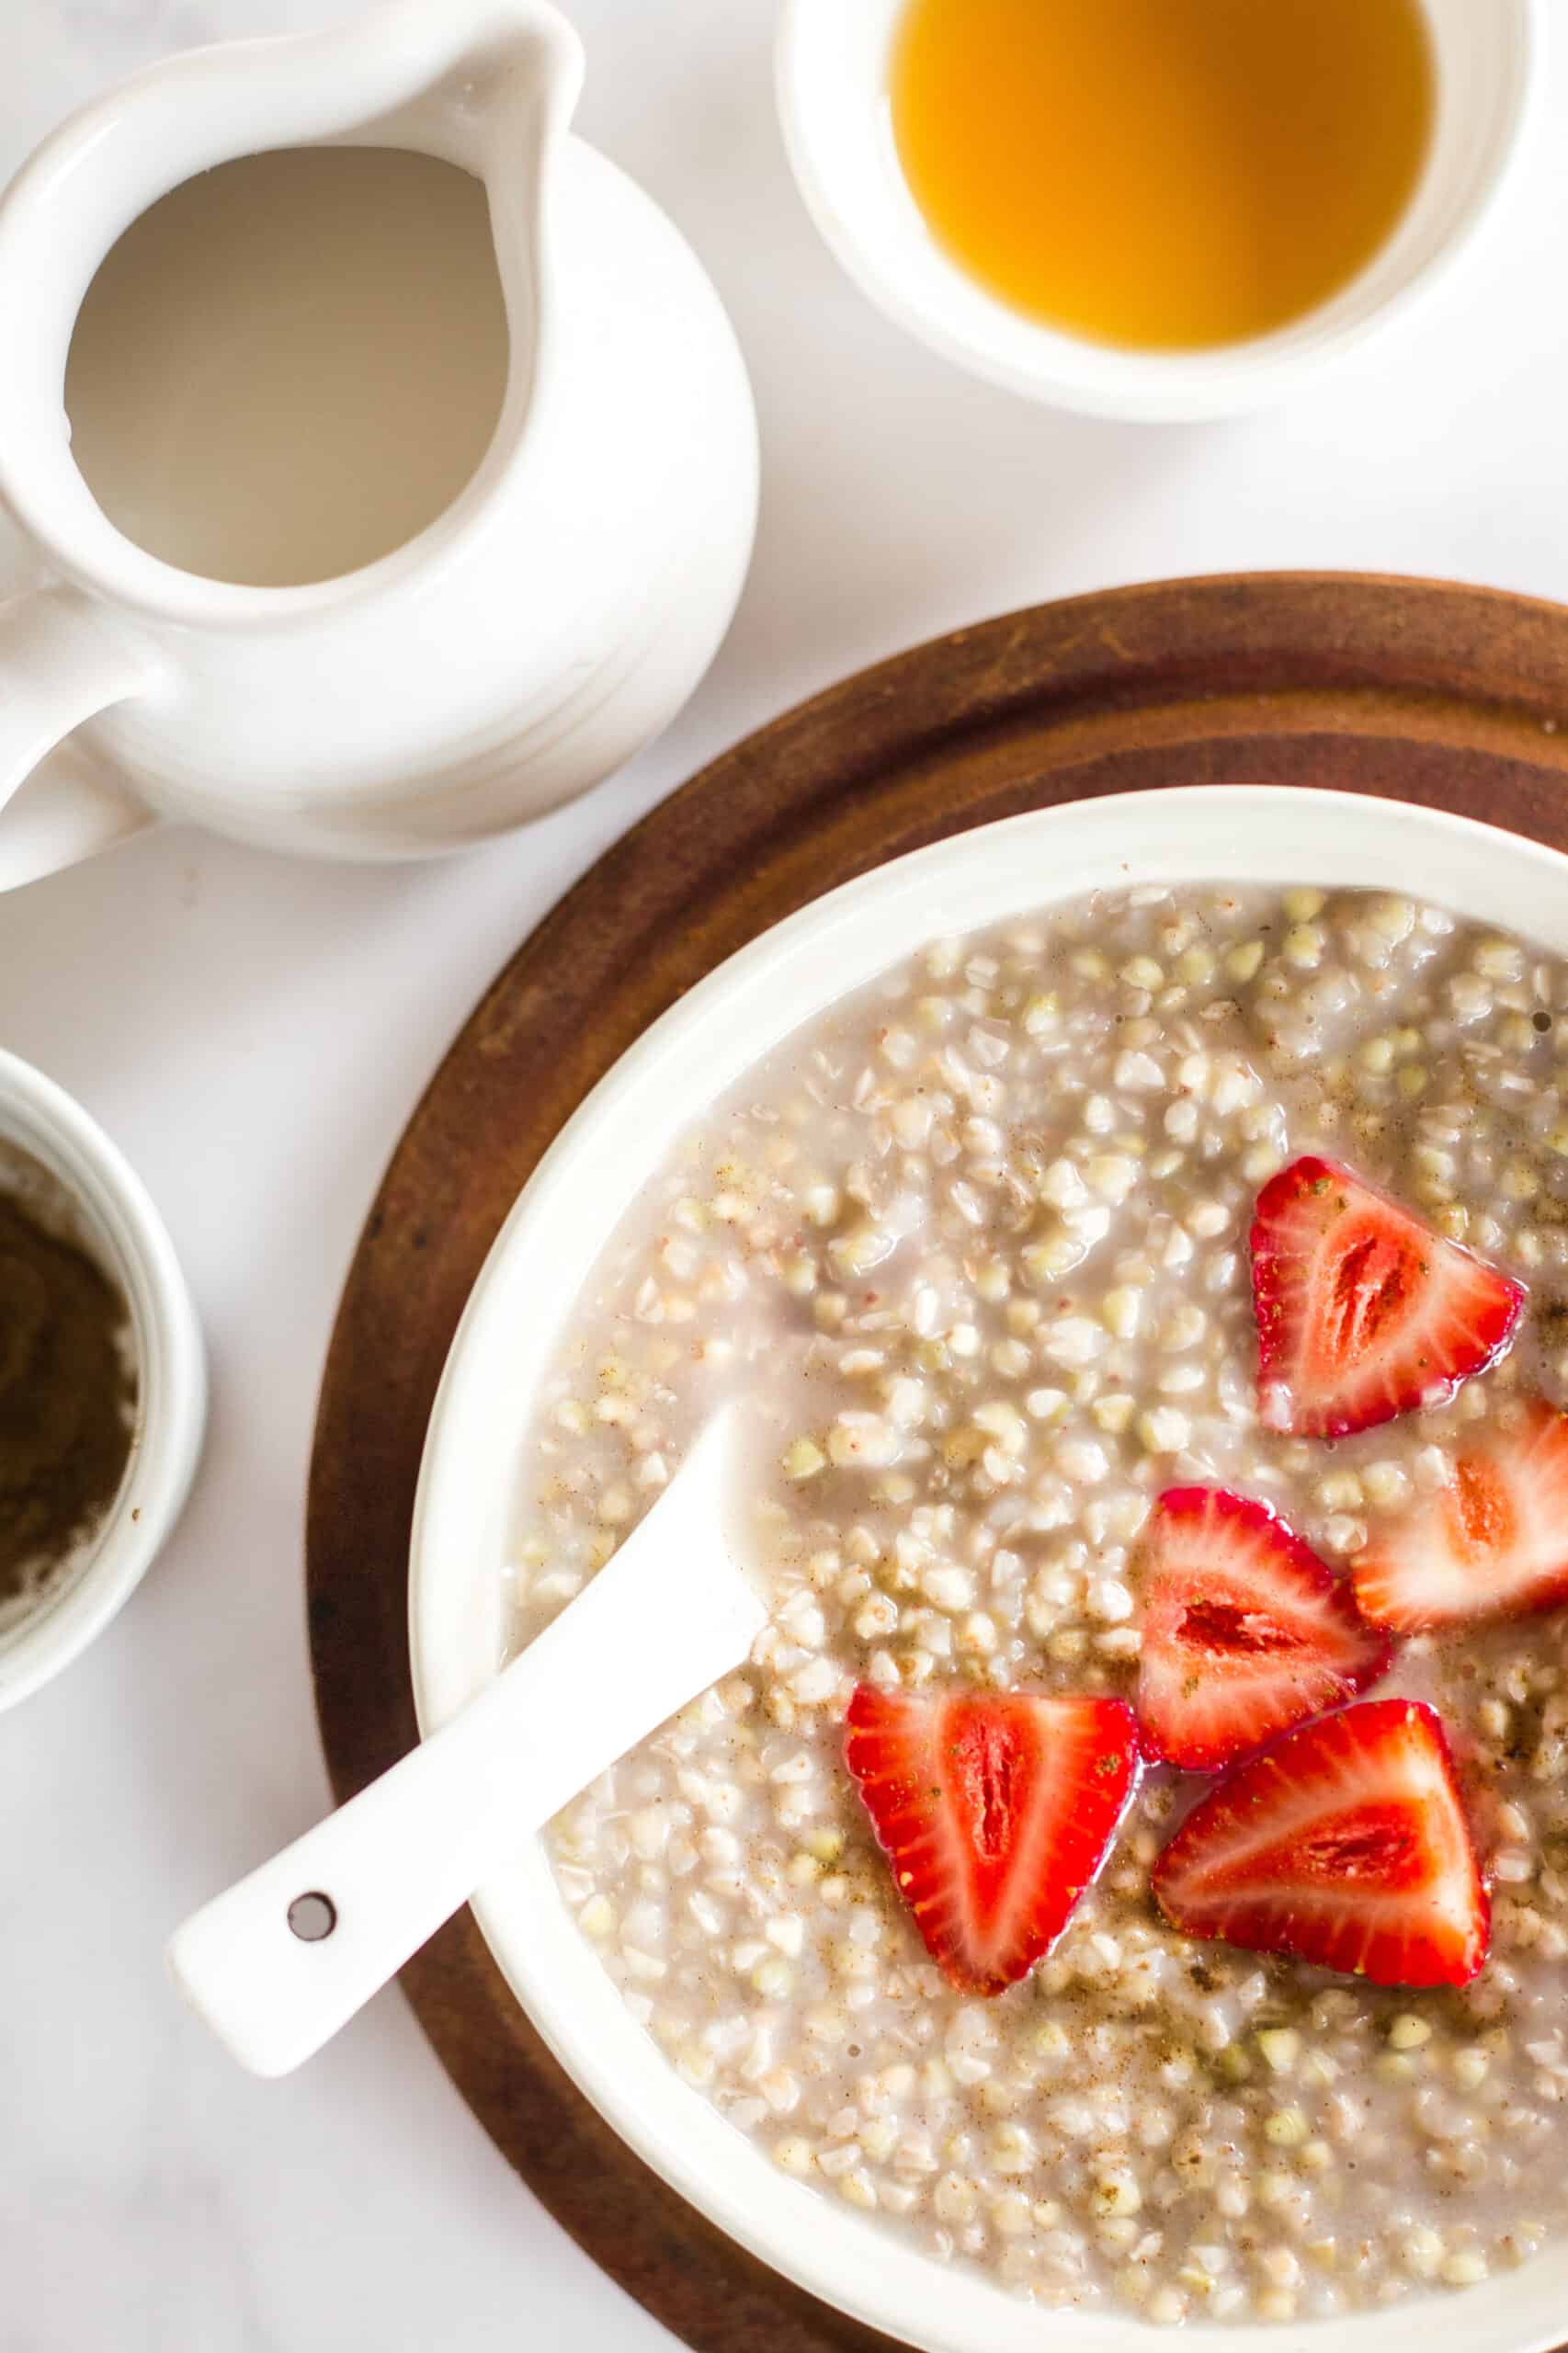 A bowl of strawberries and buckwheat porridge on a wooden board.